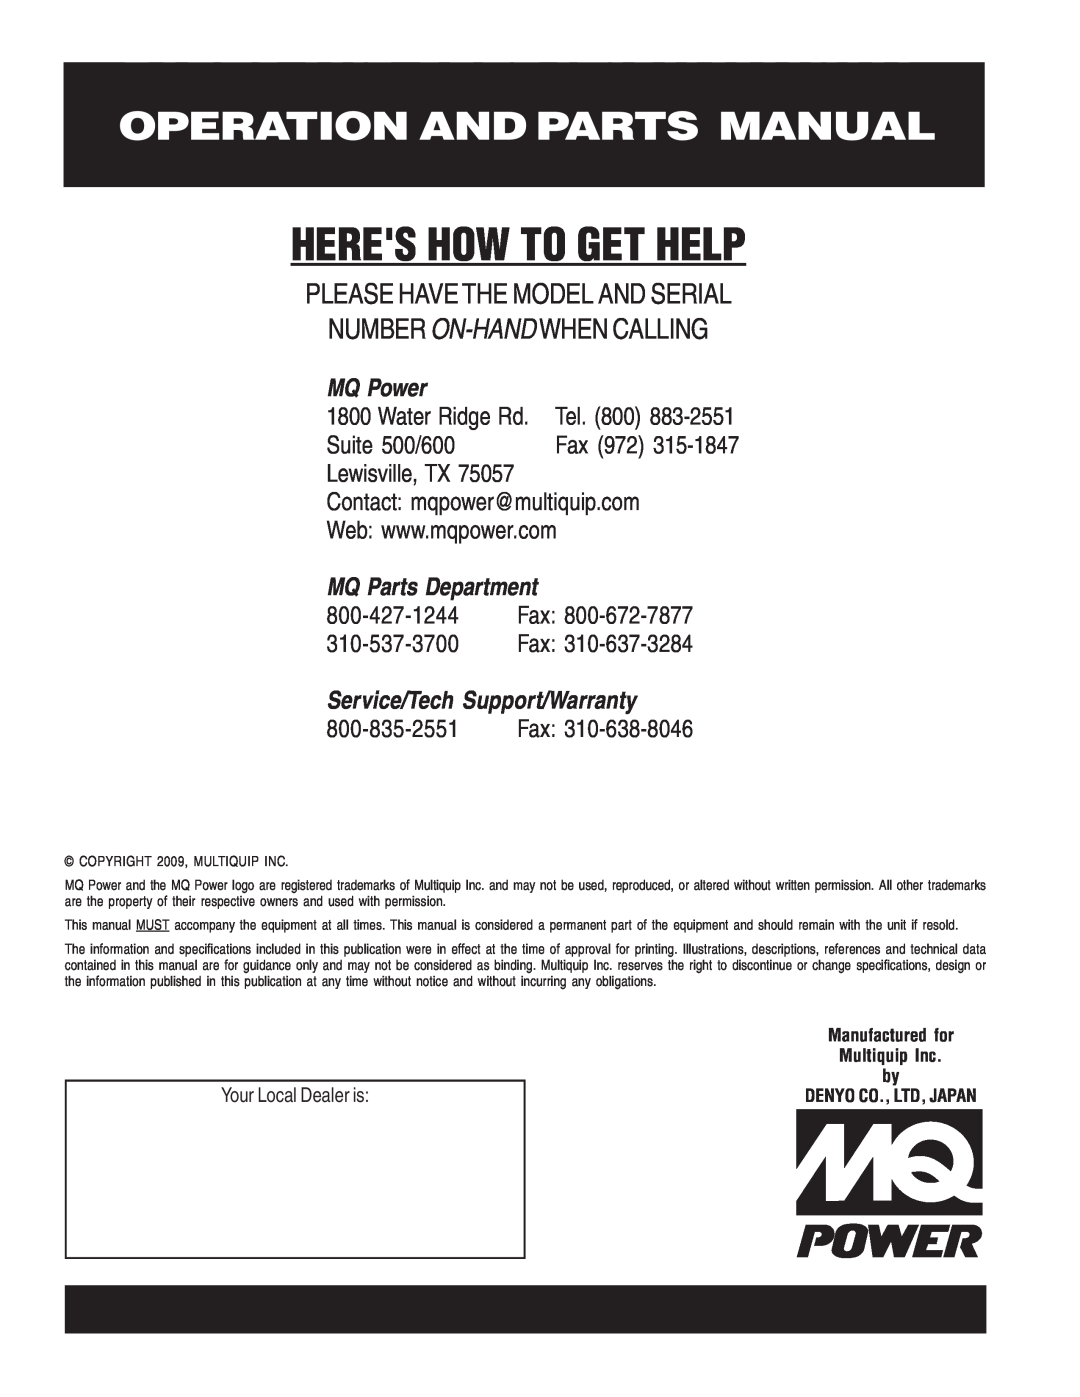 Multiquip DCA-15SPX4 Heres How To Get Help, Operation And Parts Manual, MQ Power, Water Ridge Rd. Tel, Suite 500/600 